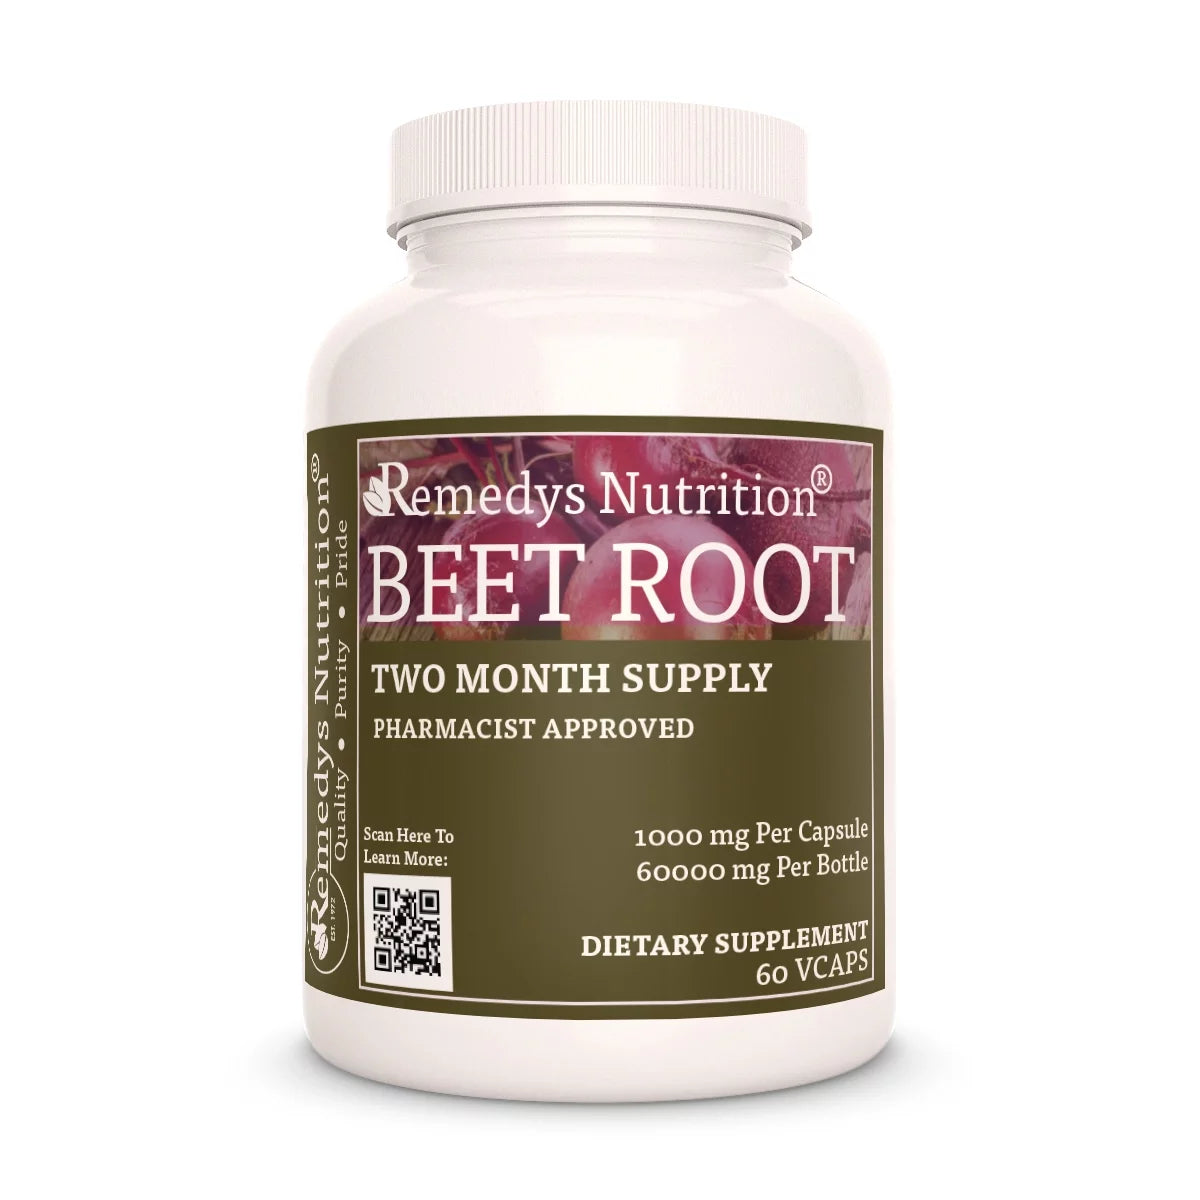 Image of Remedy's Nutrition® Beet Root Capsules Dietary Herbal Supplement front bottle. Made in the USA. Beta vulgaris.